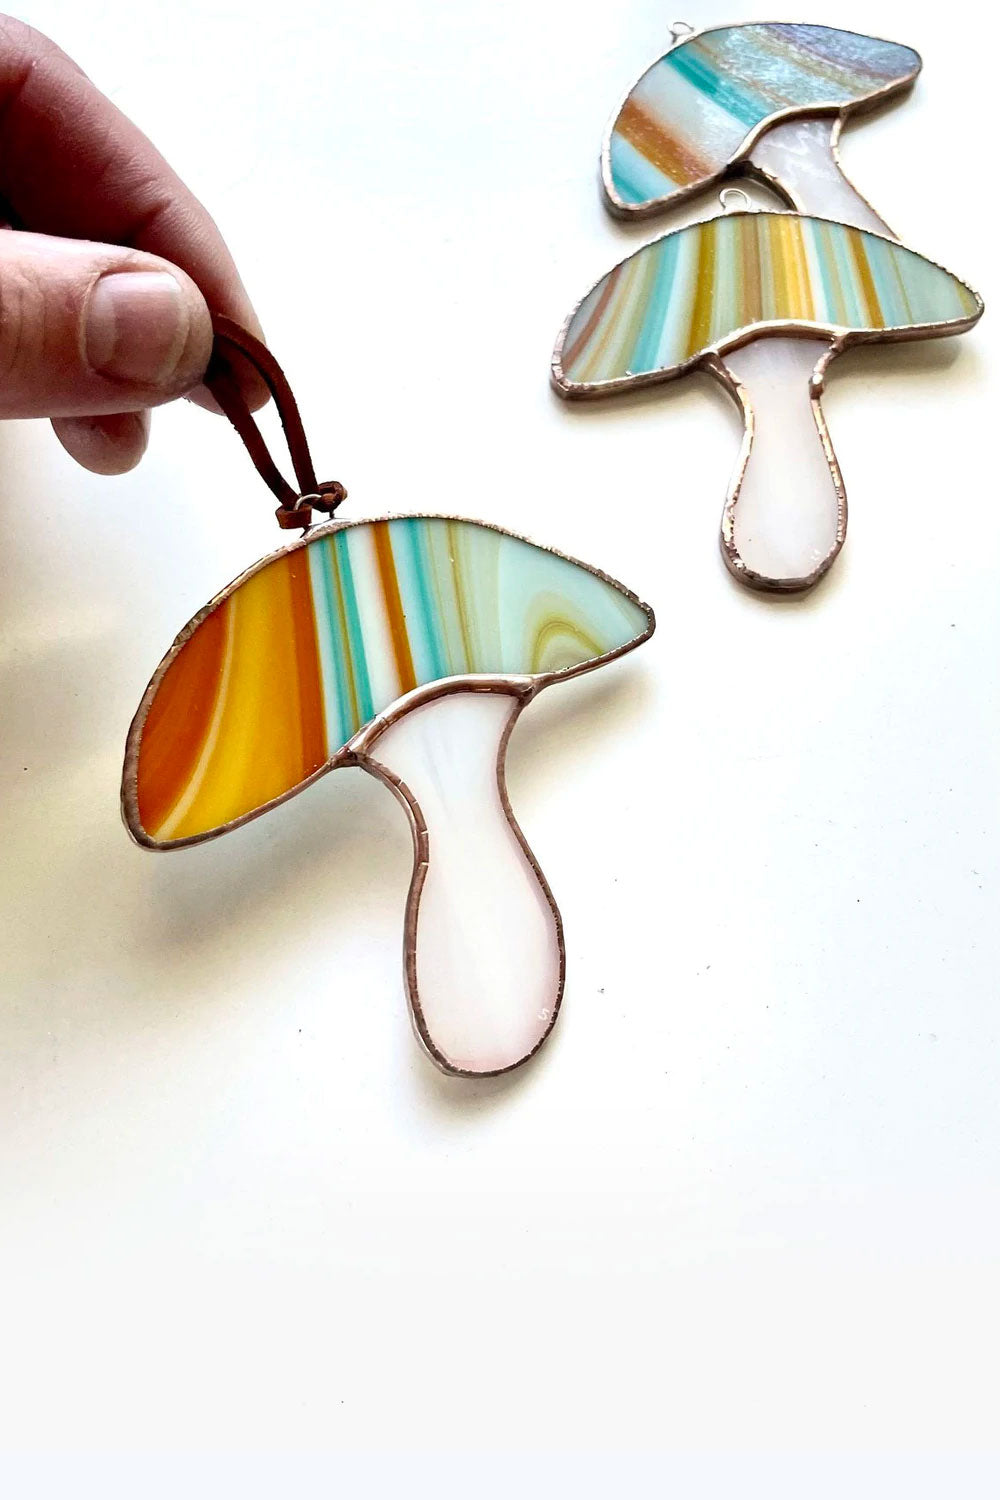 Stained Glass Mushroom Ornament